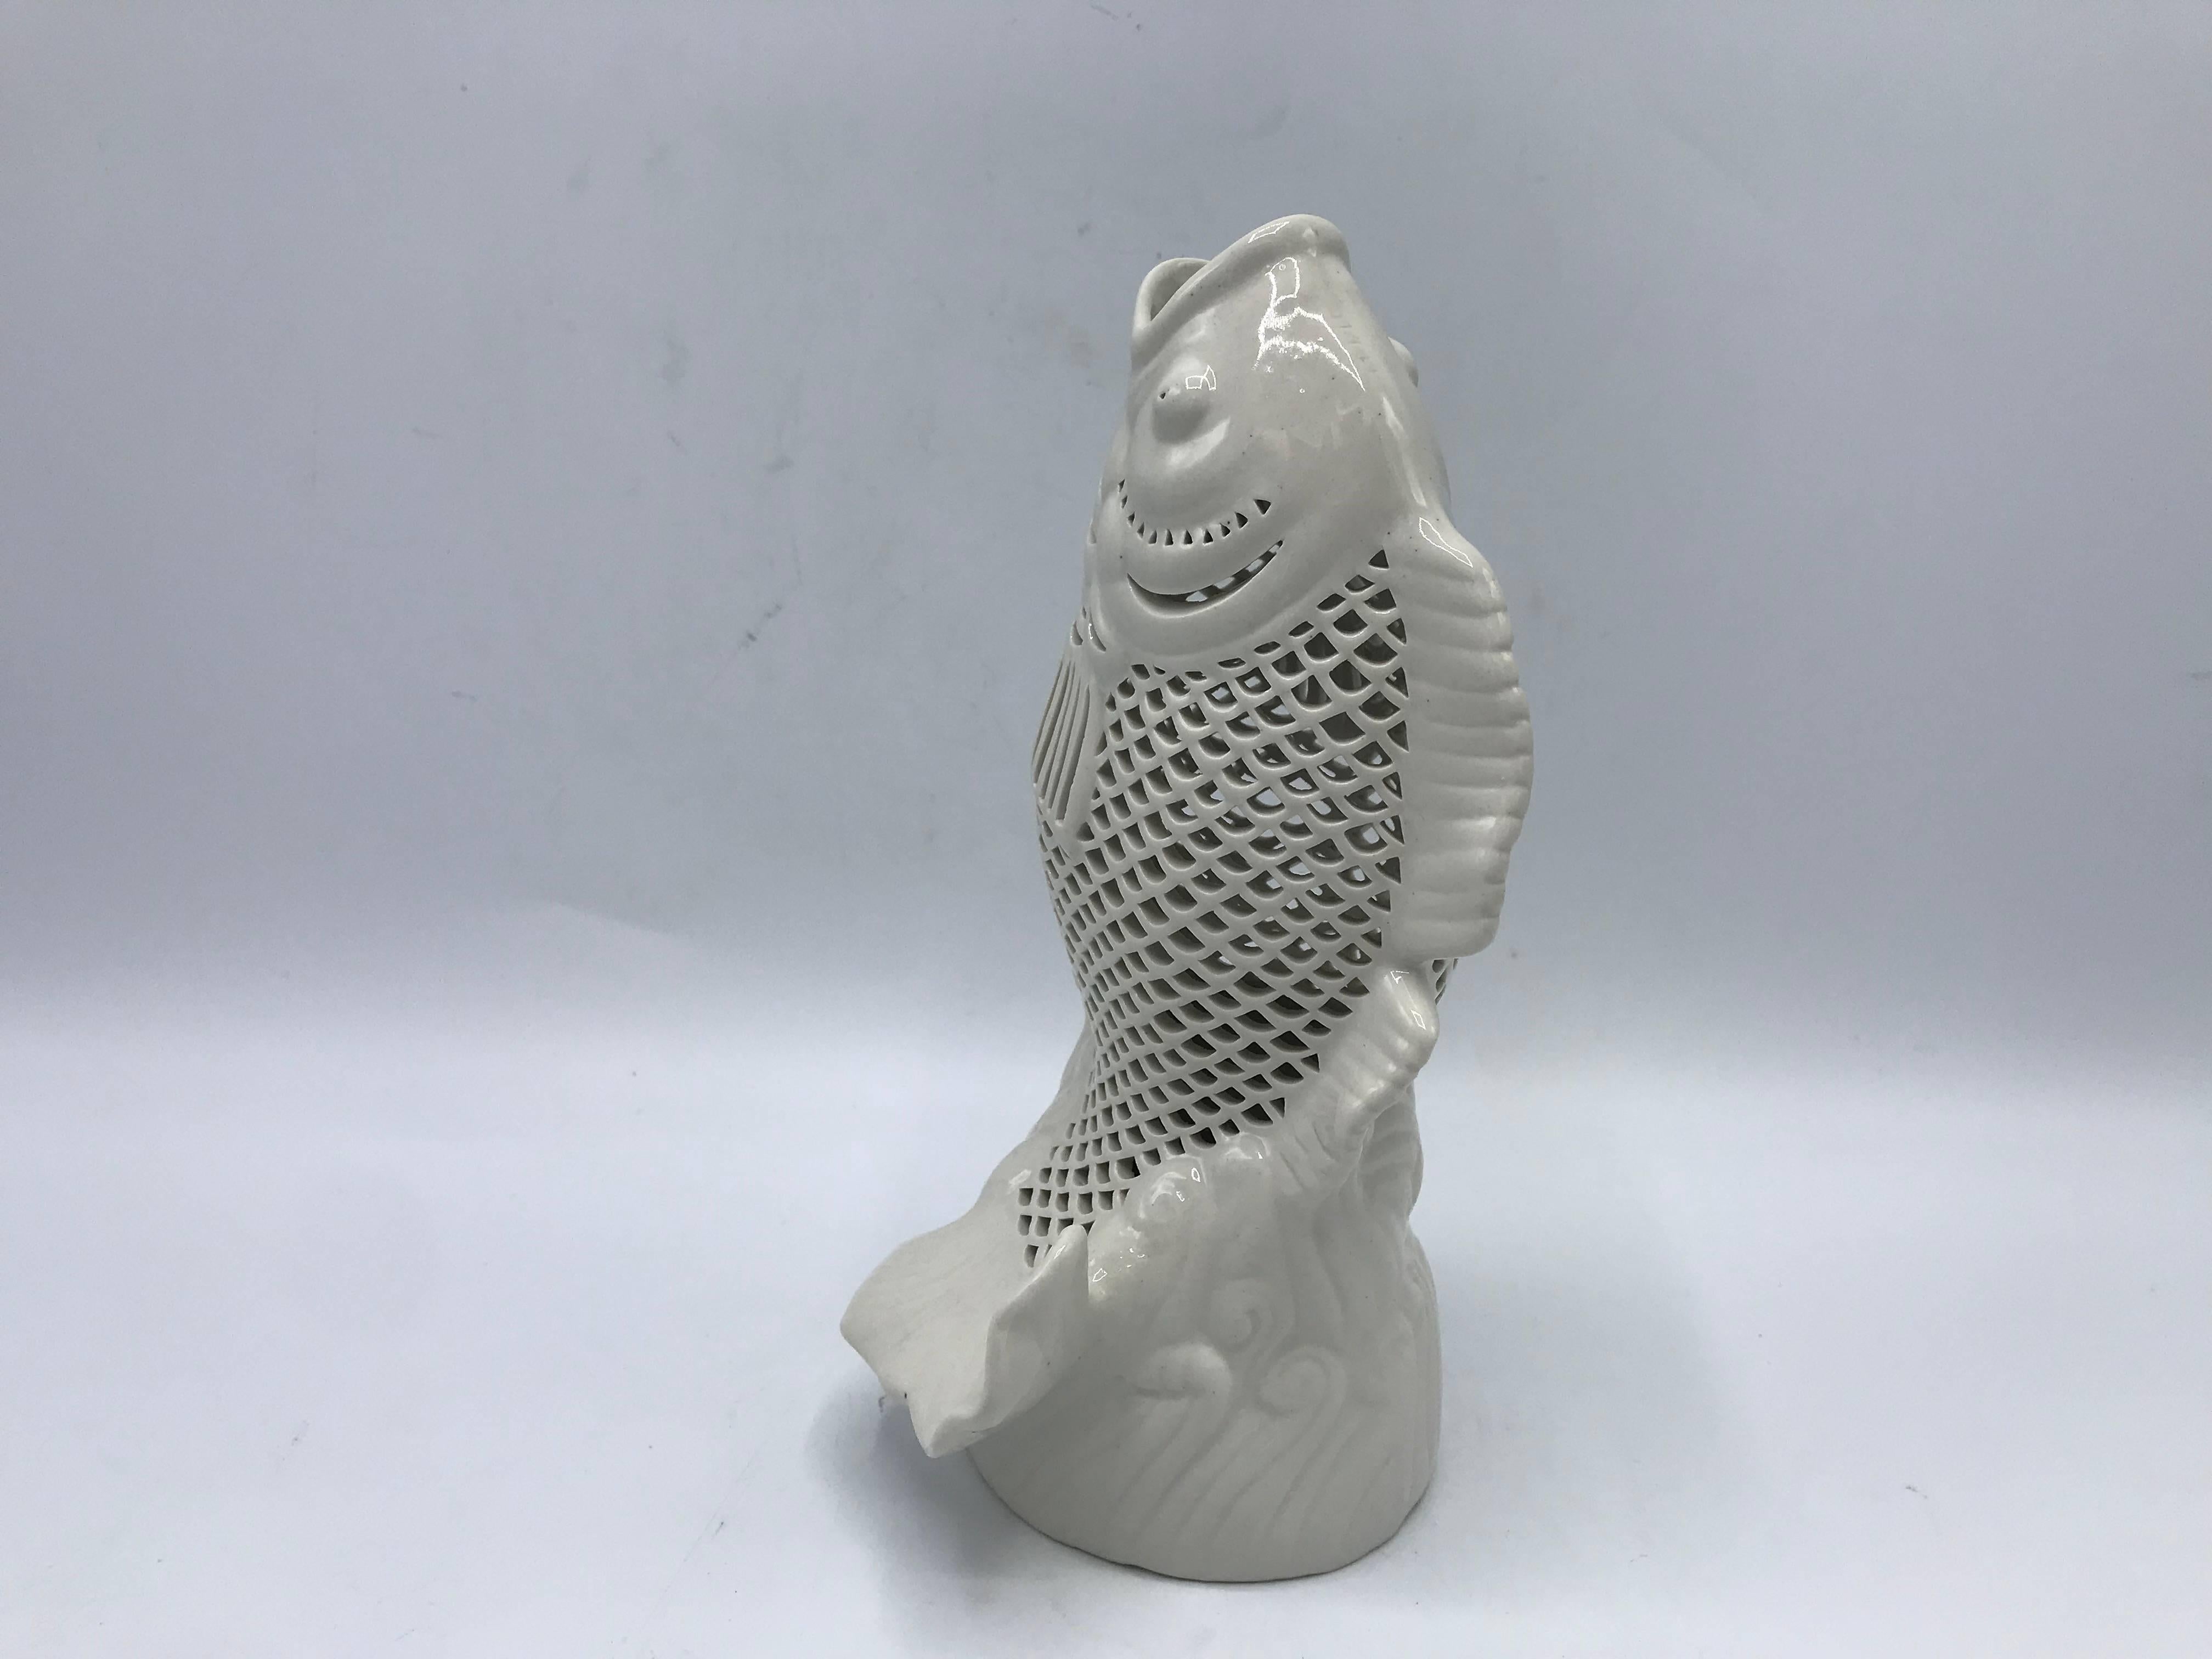 Offered is a fabulous, 1960s Blanc de Chine koi fish sculpture. Pure white porcelain. Pierced along the scales. Small hole underneath, allowing it to easily be converted into a lamp.